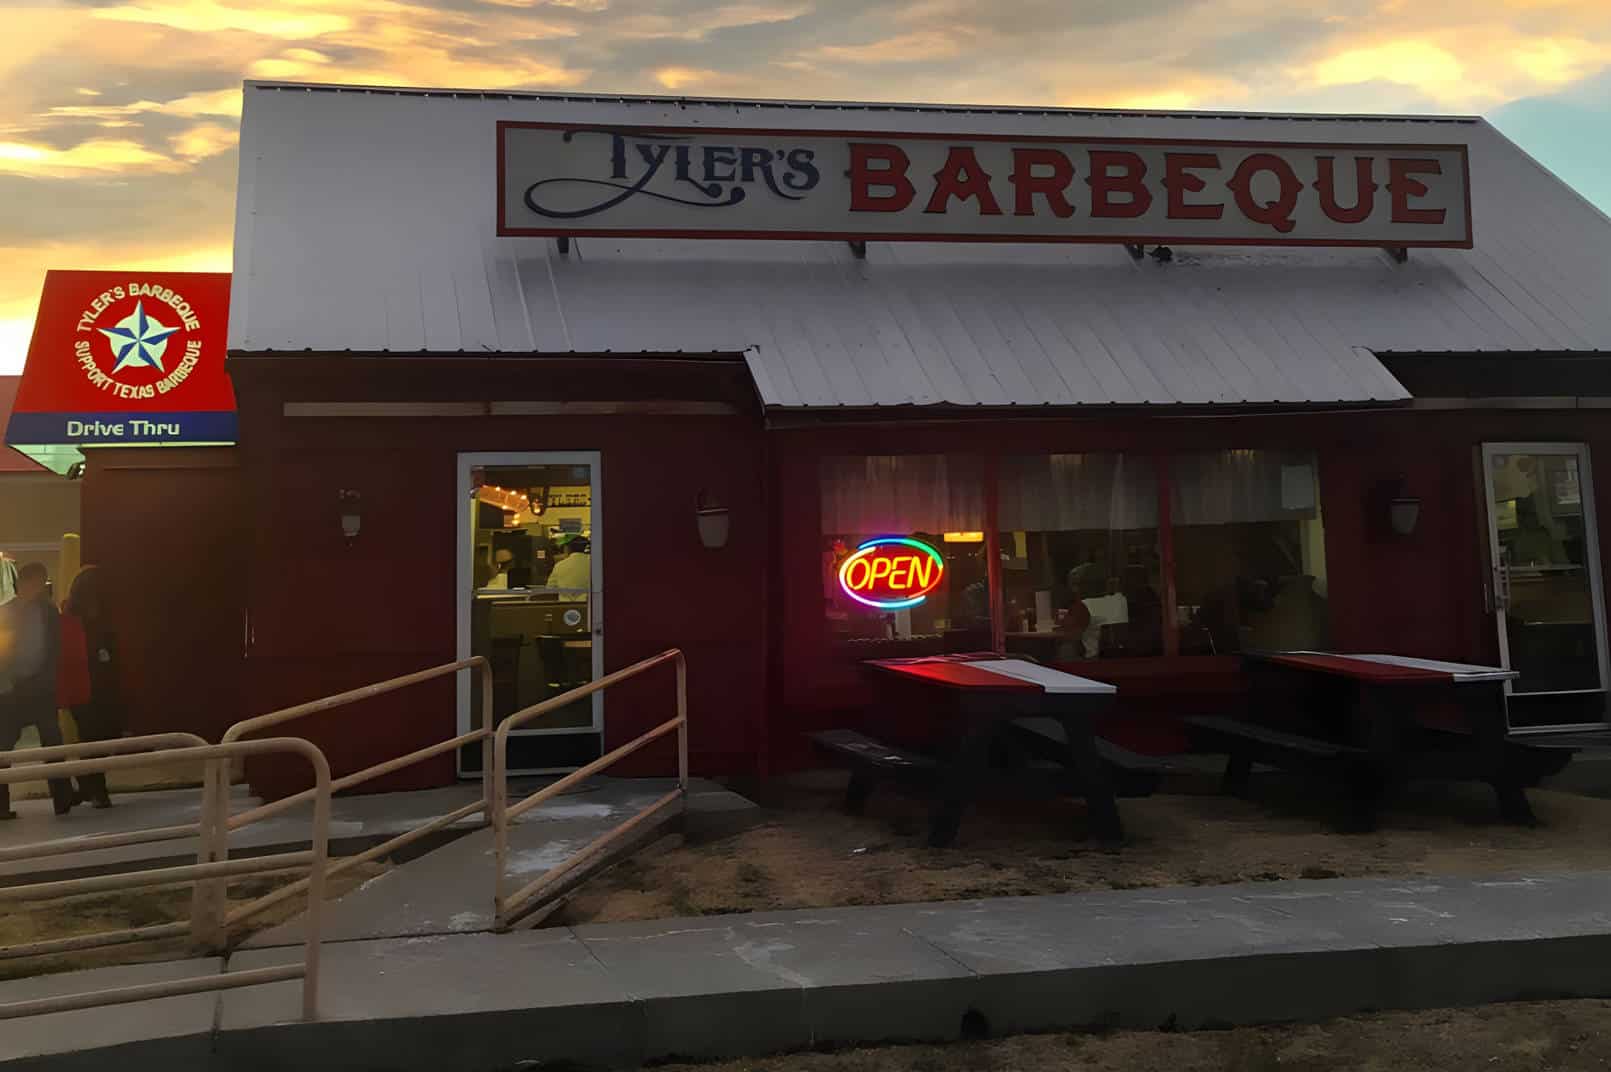 Tyler’s Barbecue